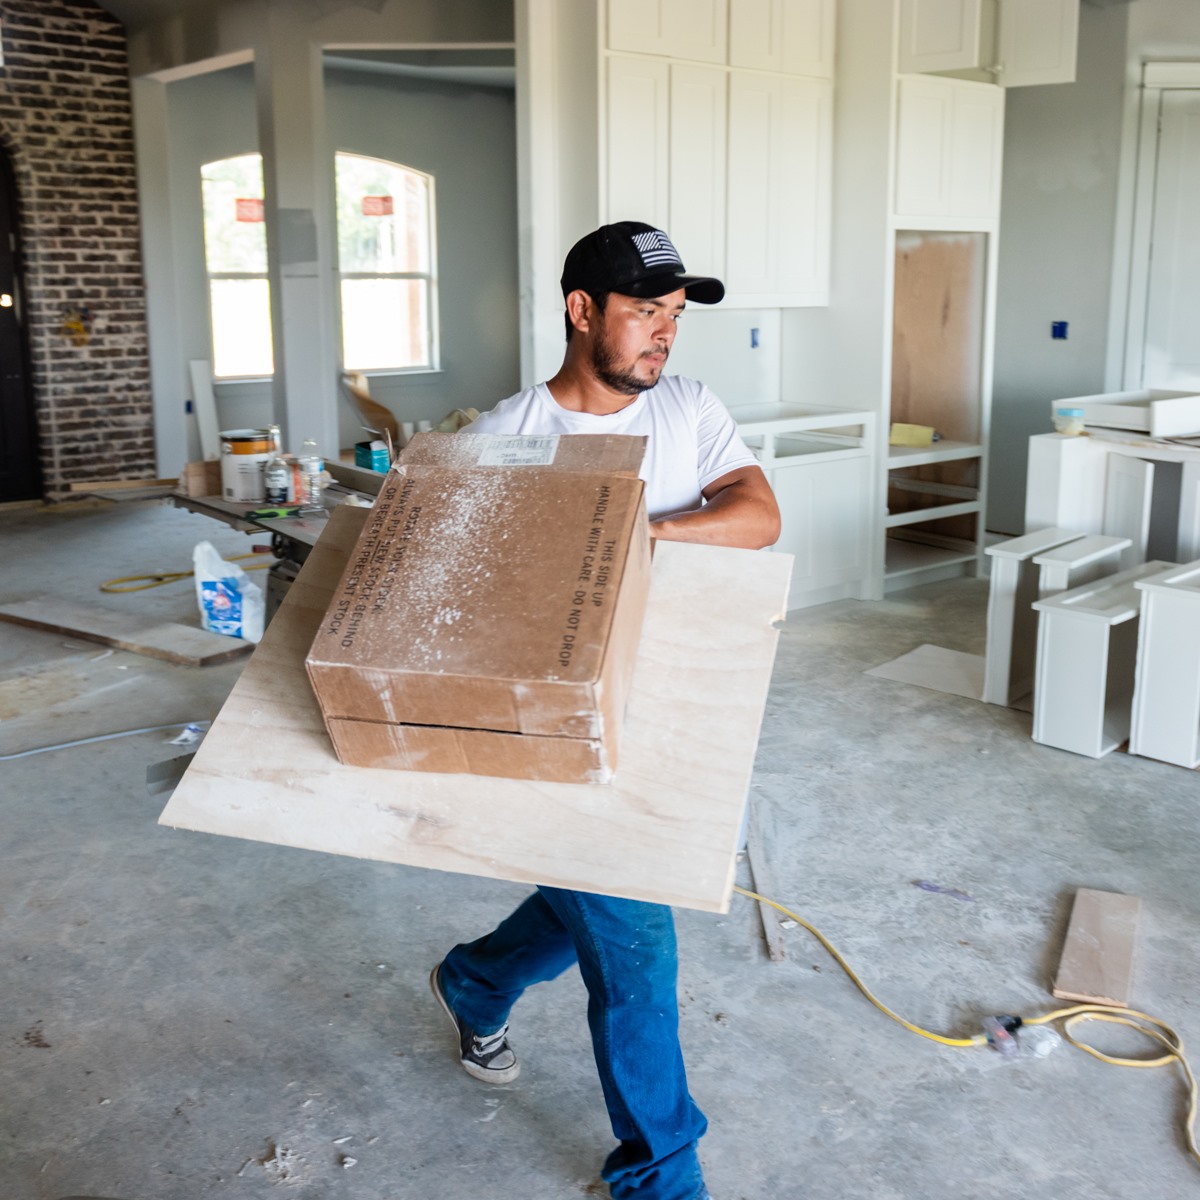 junk queen tx | collin county dallas dumpster rental |Amazon Organization Essentials by popular Dallas lifestyle Cute and Little: image of a man carrying a plywood board and a cardboard box. 